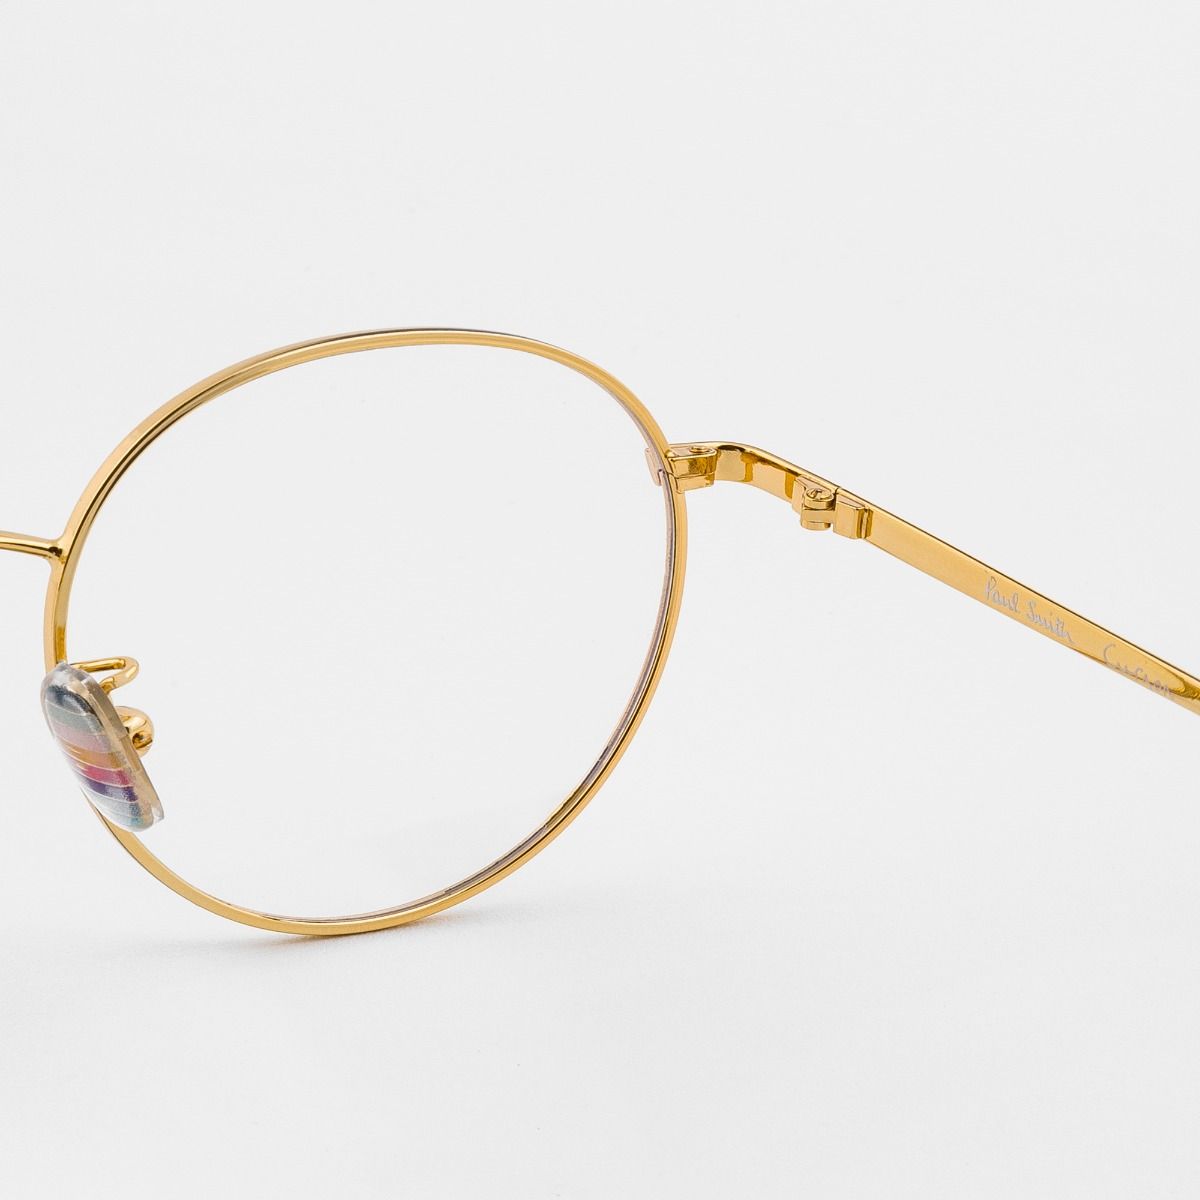 Paul Smith Curzon Optical Round Glasses